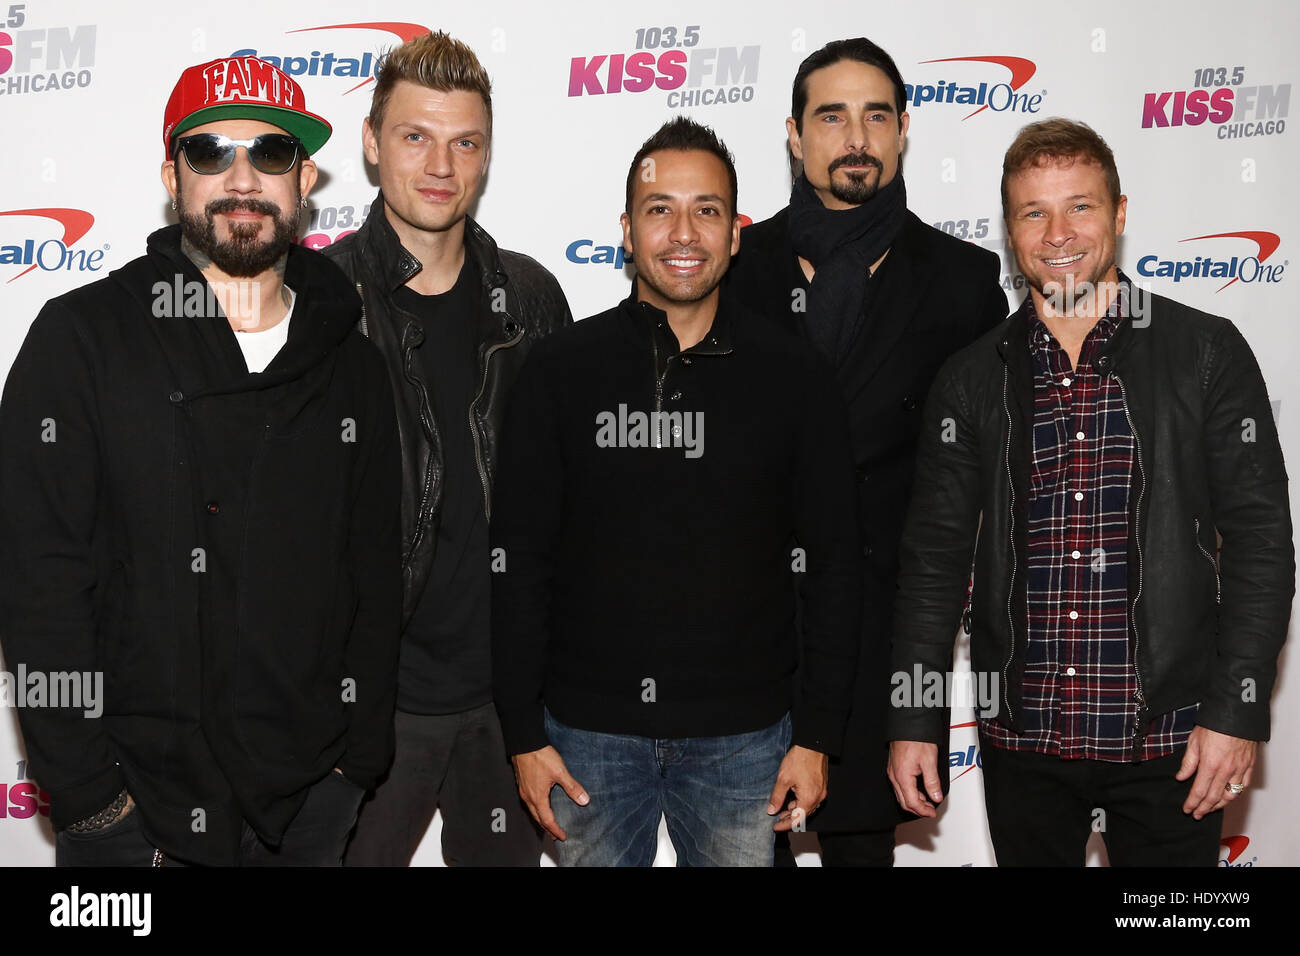 Chicago, United States. 14th Dec, 2016. CHICAGO-DEC 14: (L-R) A. J. McLean, Nick Carter, Howie D., Kevin Richardson and Brian Littrell of Backstreet Boys attend 103.5 KISS FM's Jingle Ball 2016 Presented by Capital One at Allstate Arena in Chicago, IL. Cr Stock Photo